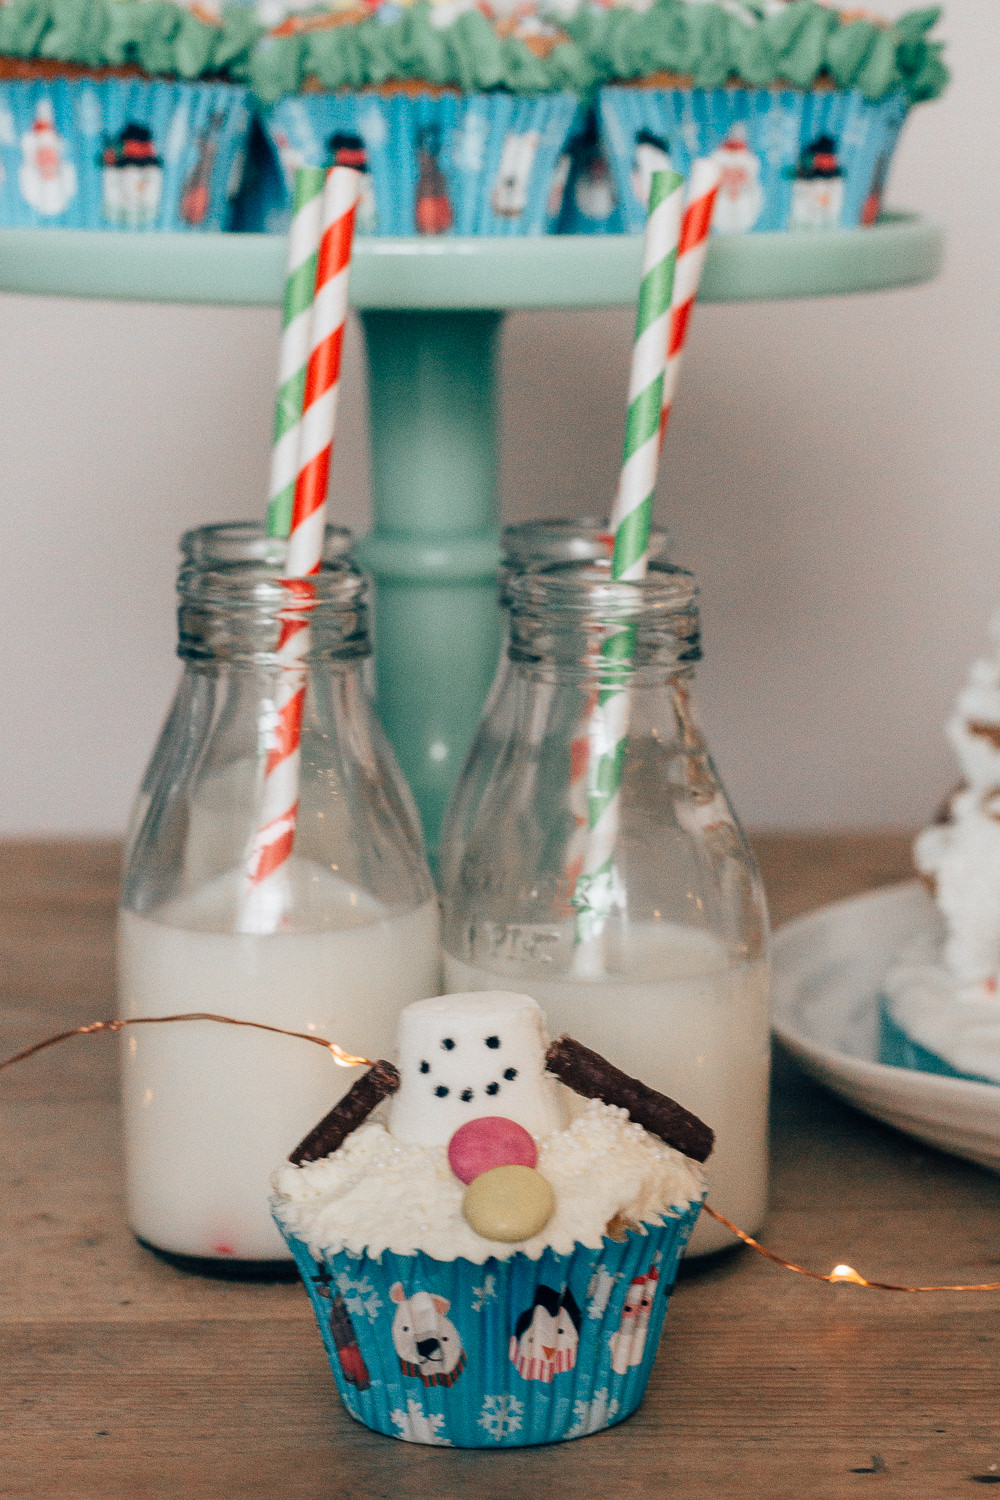 Melting snowman Christmas cupcake decorating idea with marshmallow snowman, Smartie buttons and Matchmaker arms